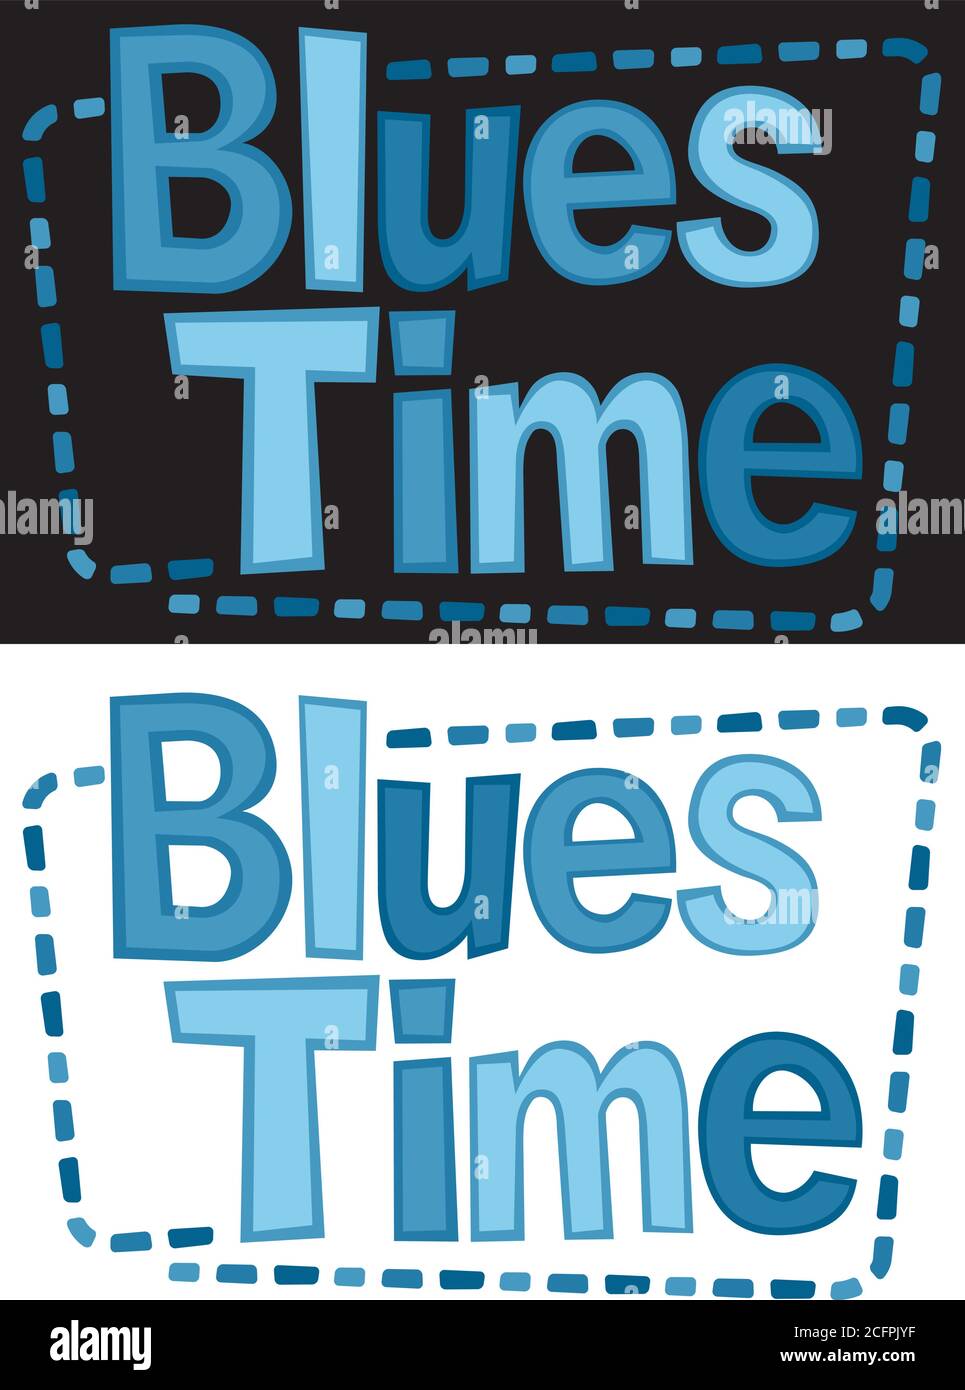 Retro style lettering phrase “Blues Time”. Typography for a poster, banner, flyer, ... Stock Vector